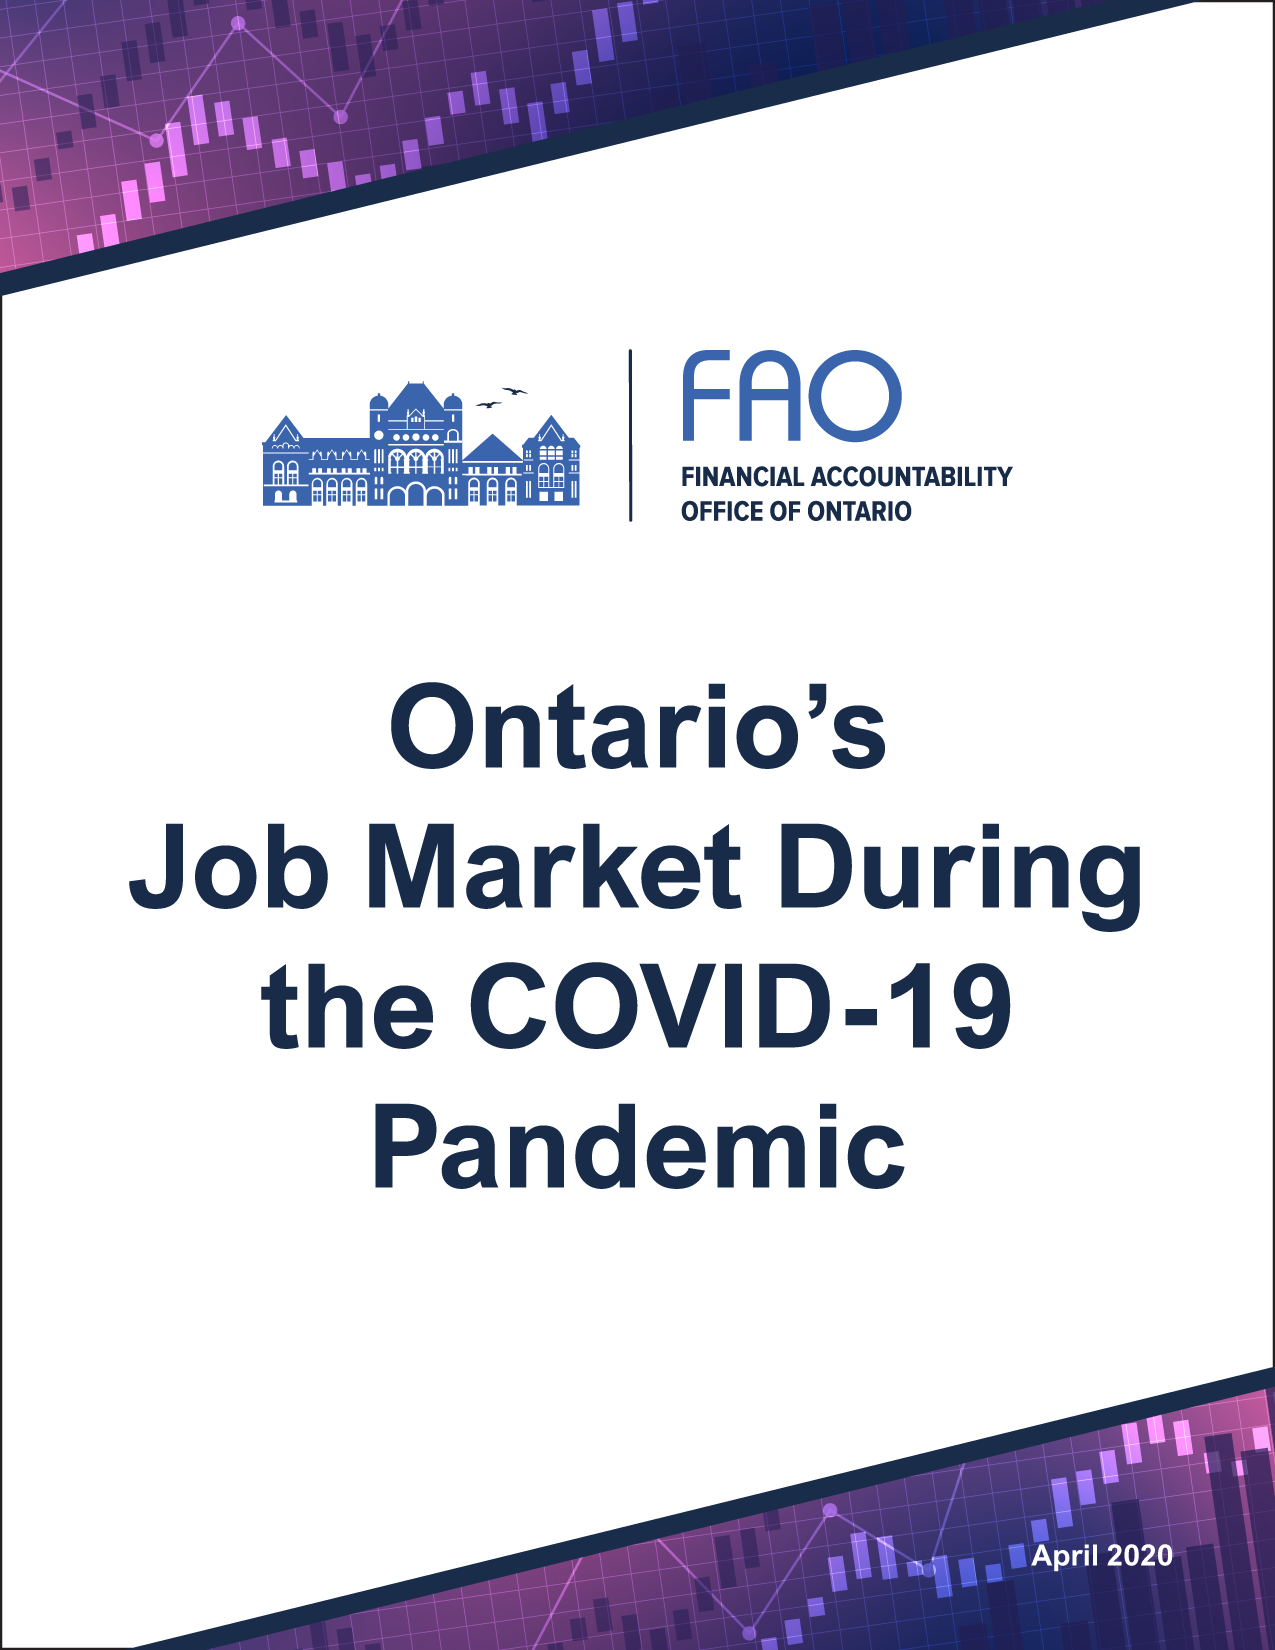 Ontario's Job Market during the COVID-19 Pandemic